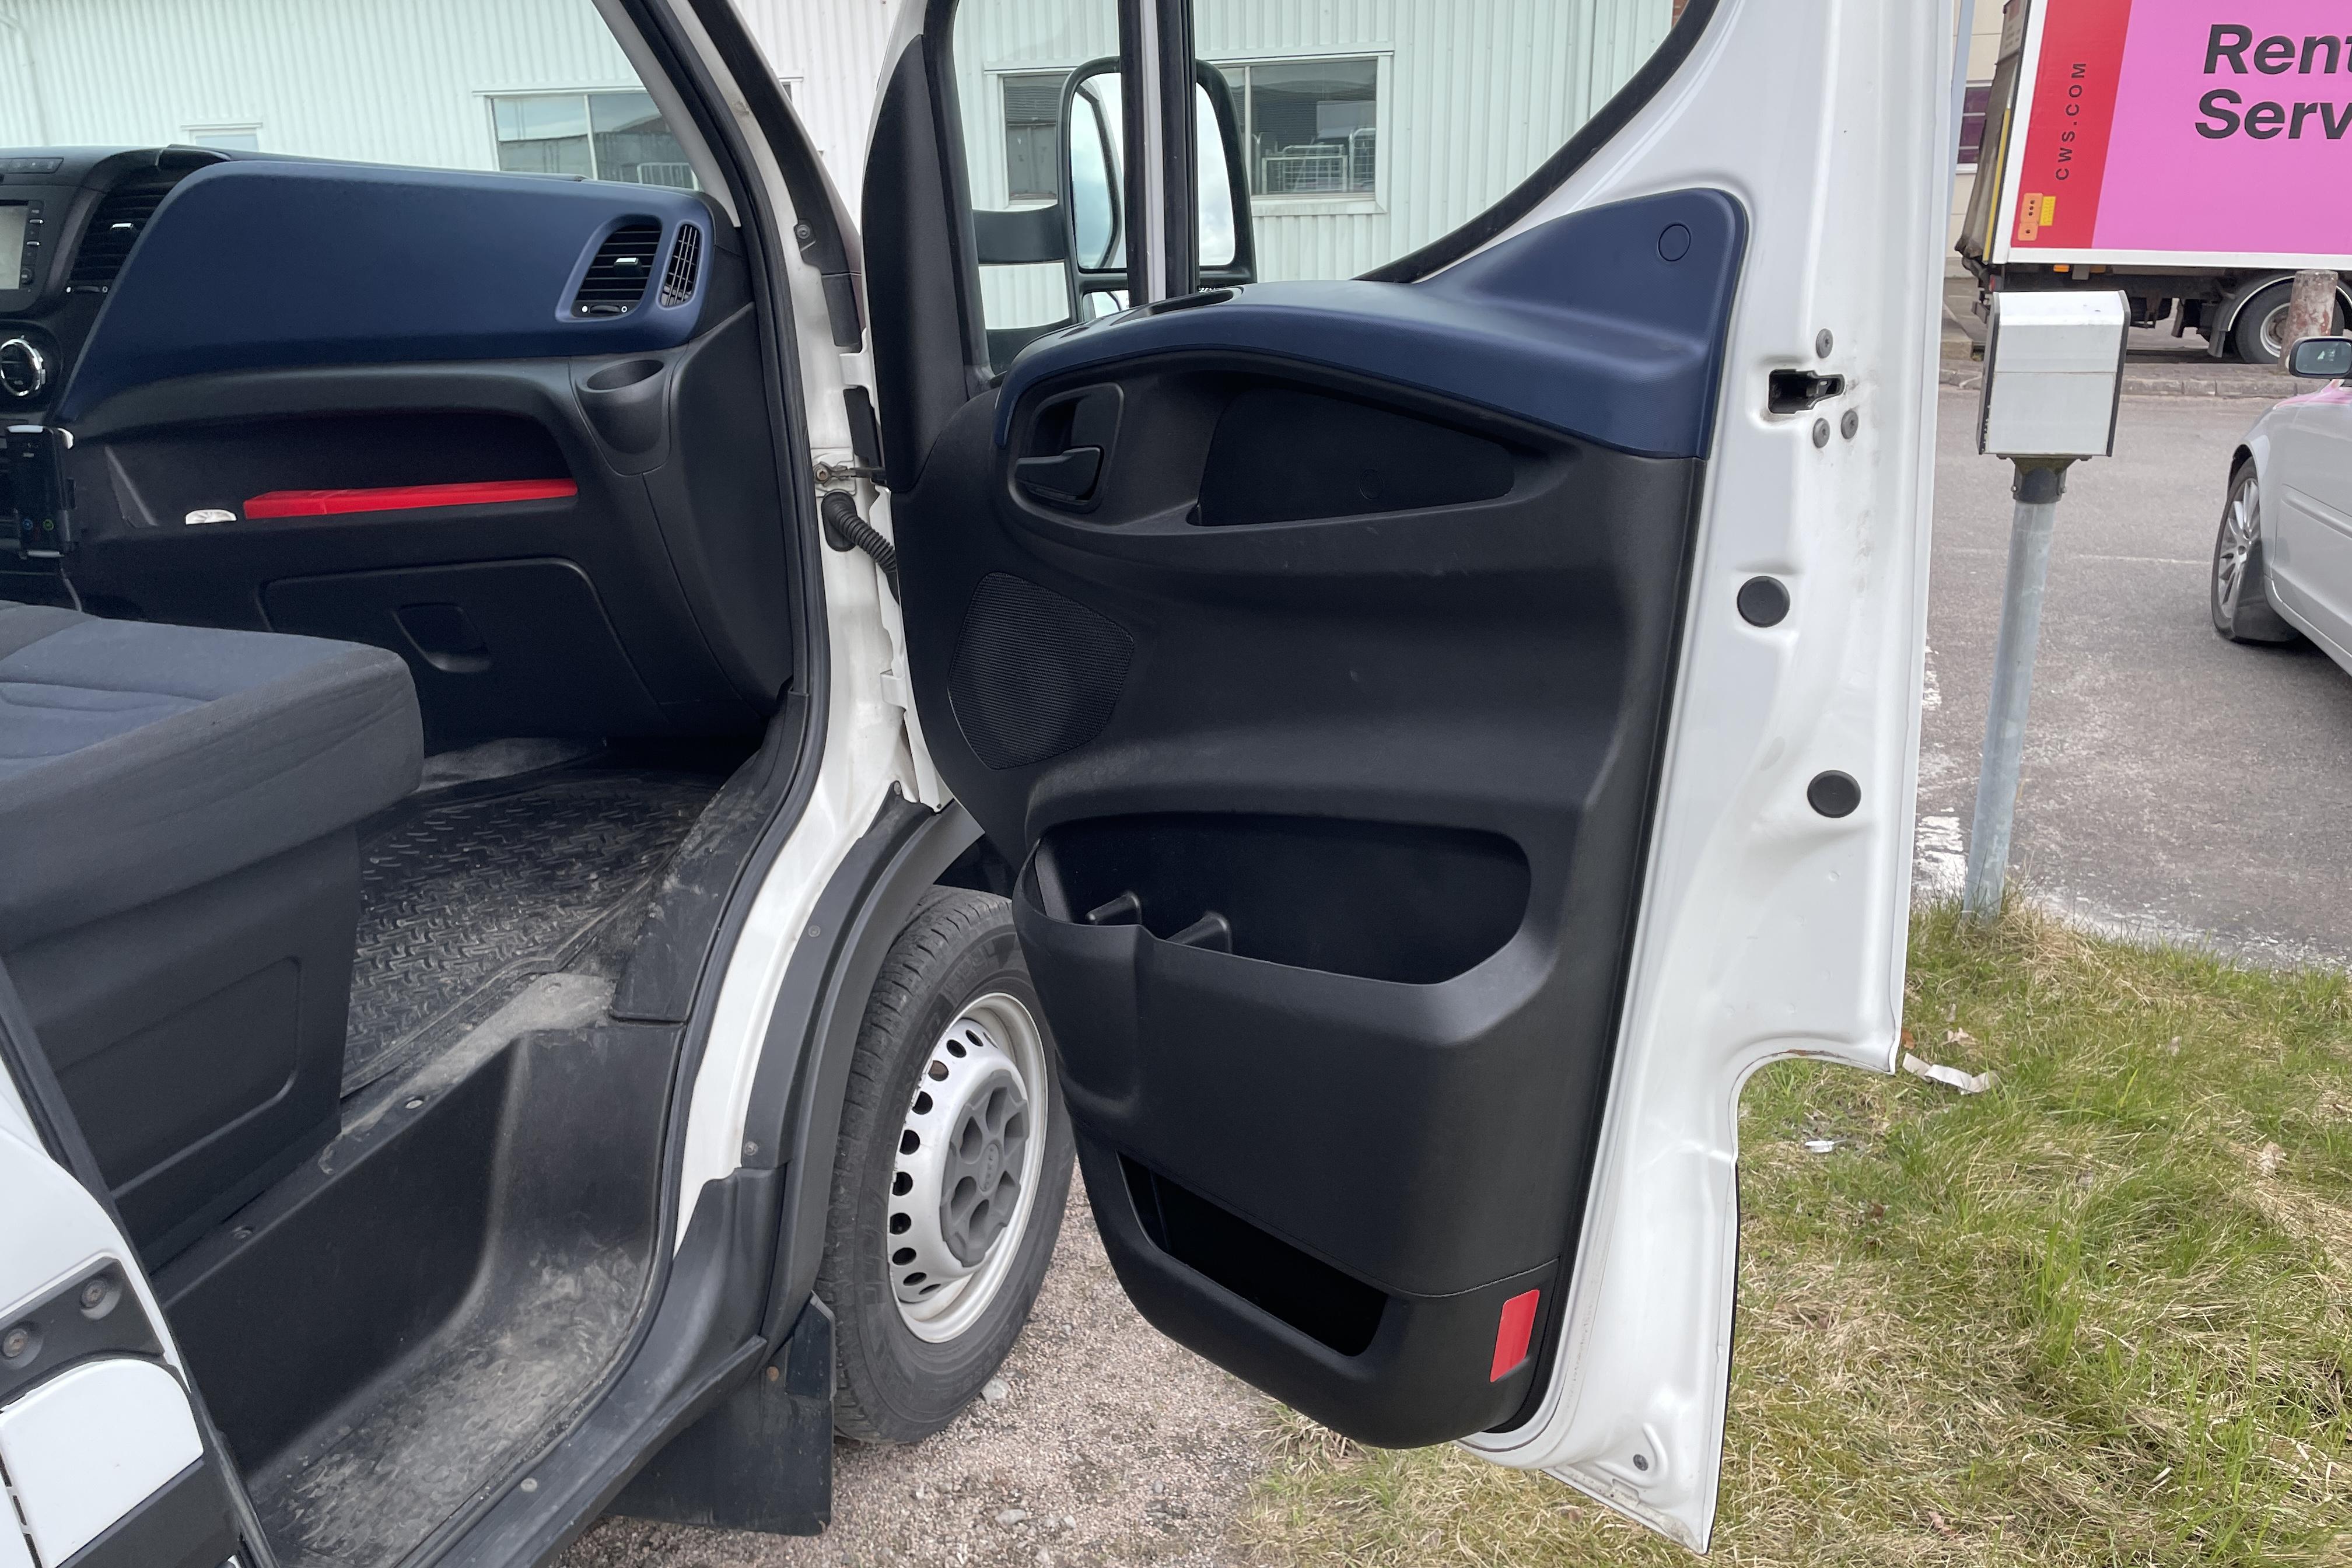 Iveco DAILY - 257 385 km - Automatic - white - 2017